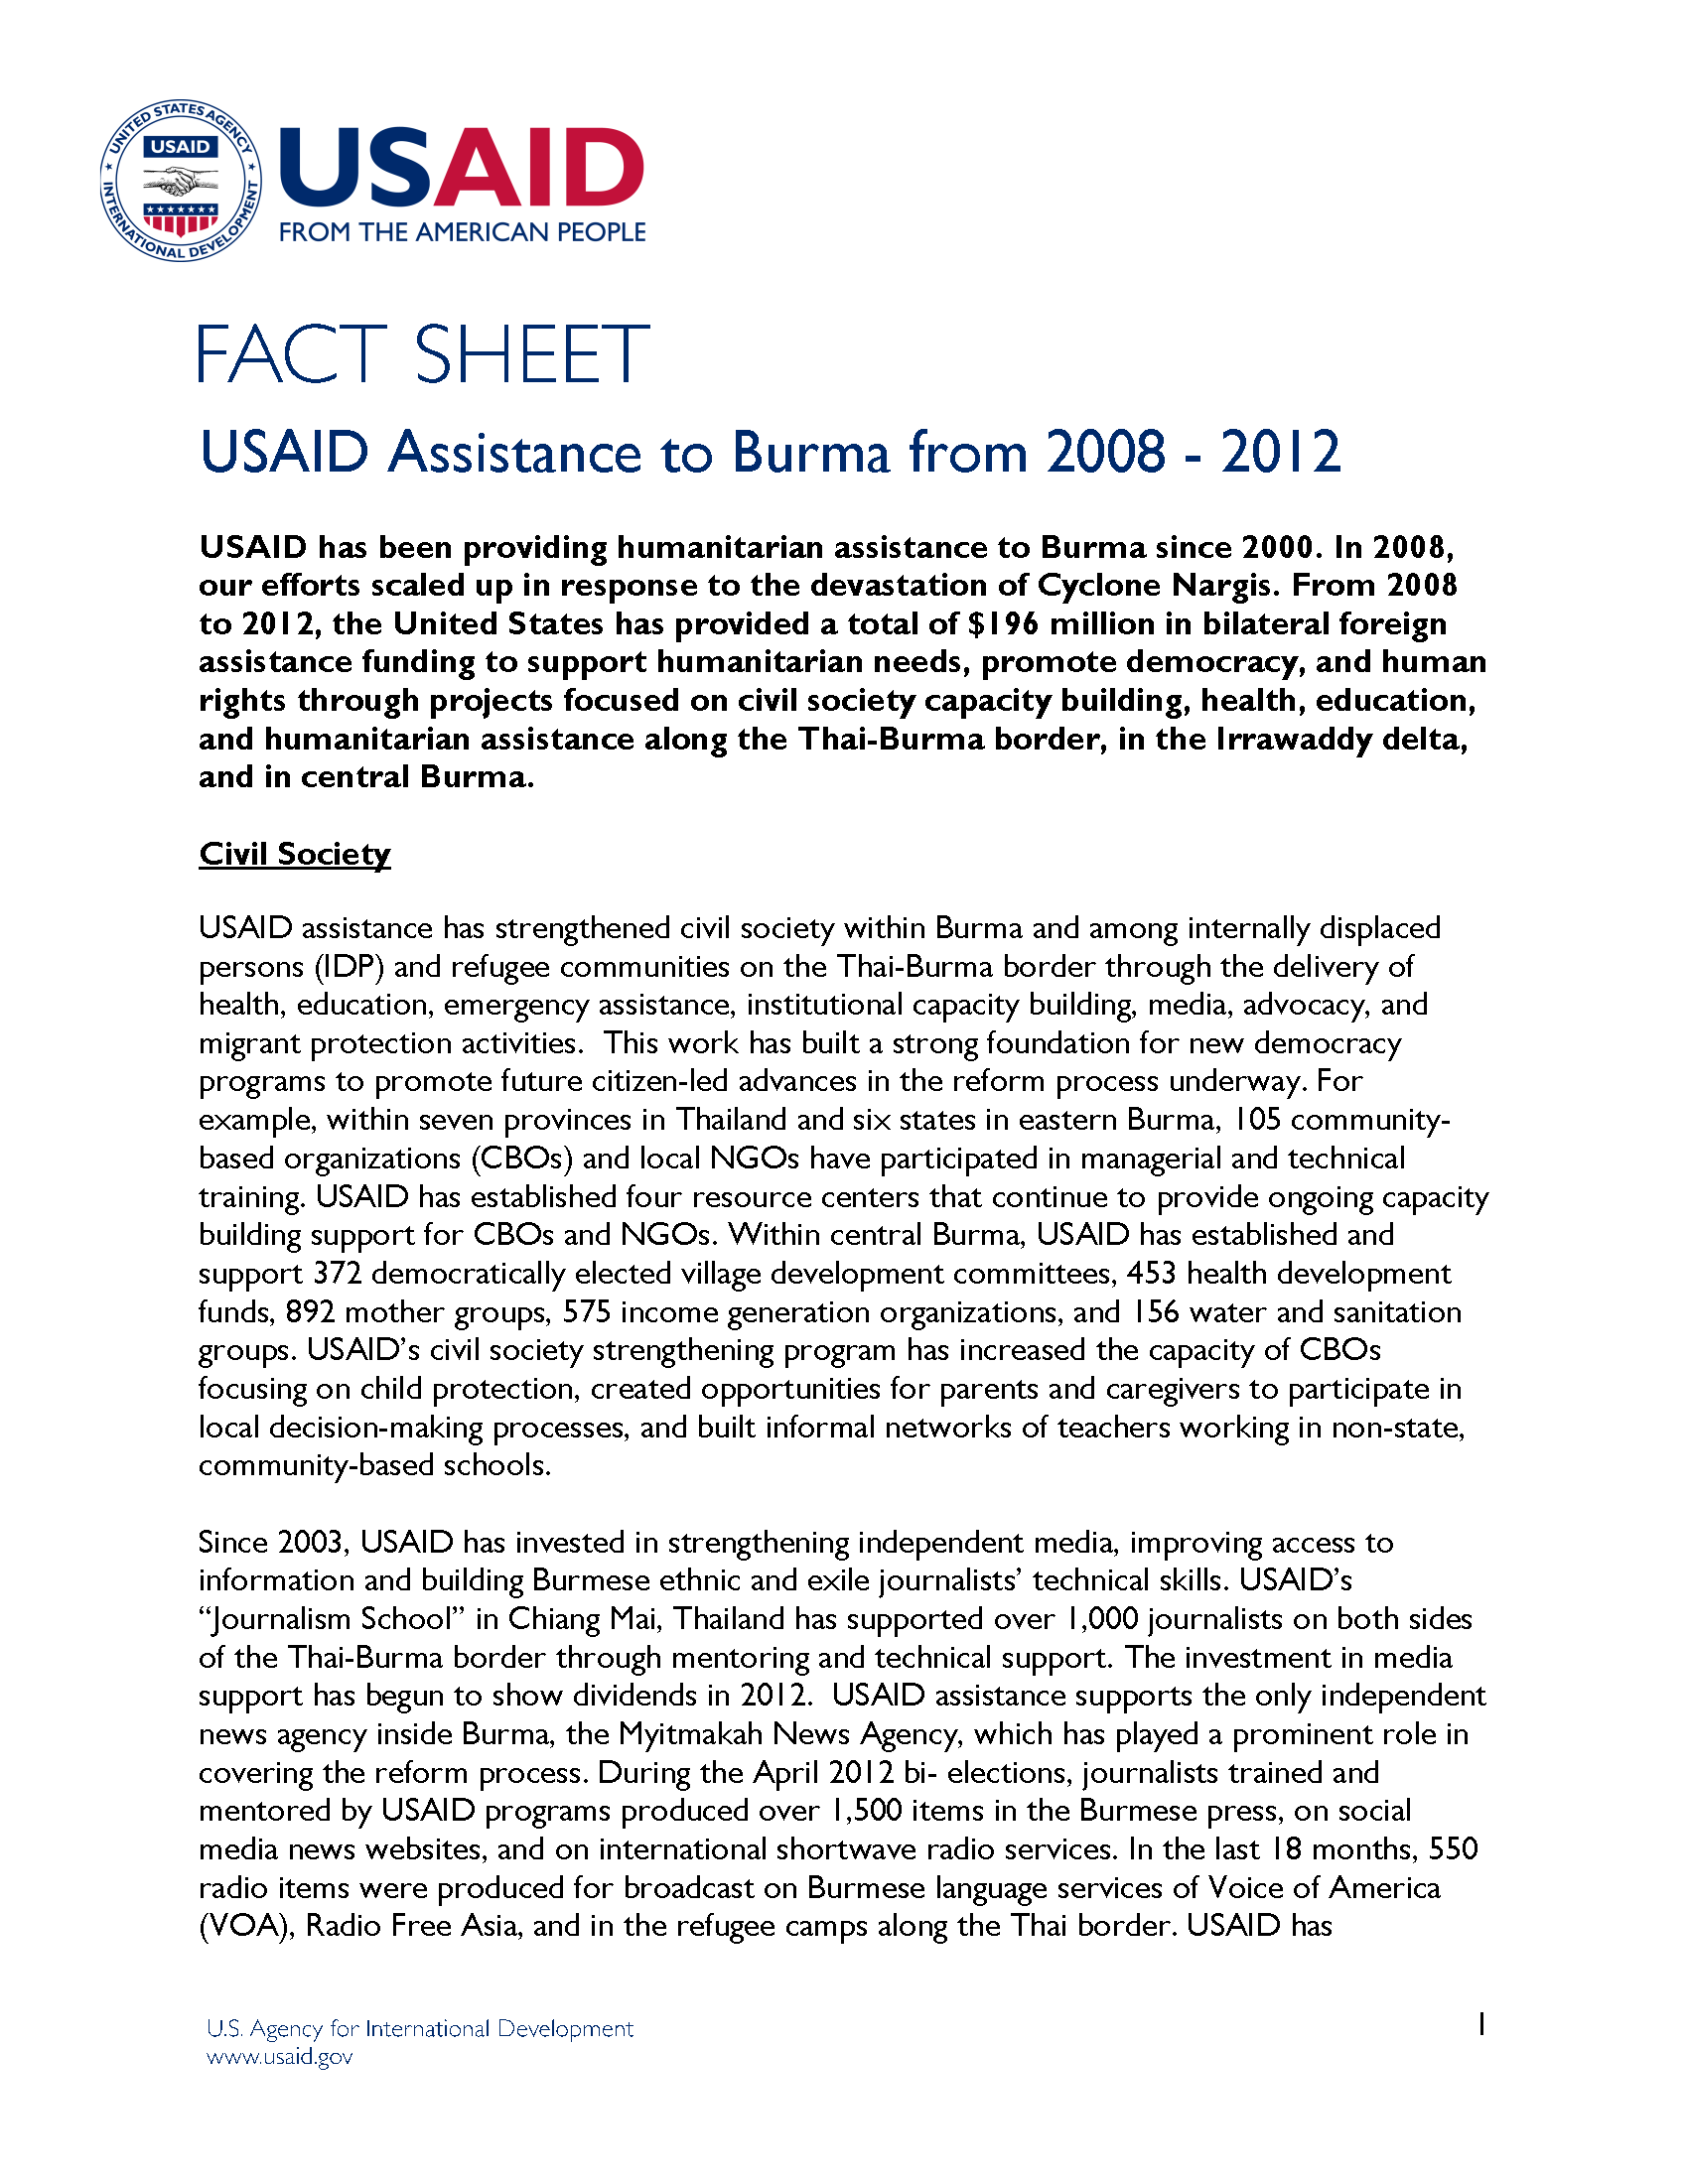 USAID Assistance to Burma from 2008 - 2012 Fact Sheet